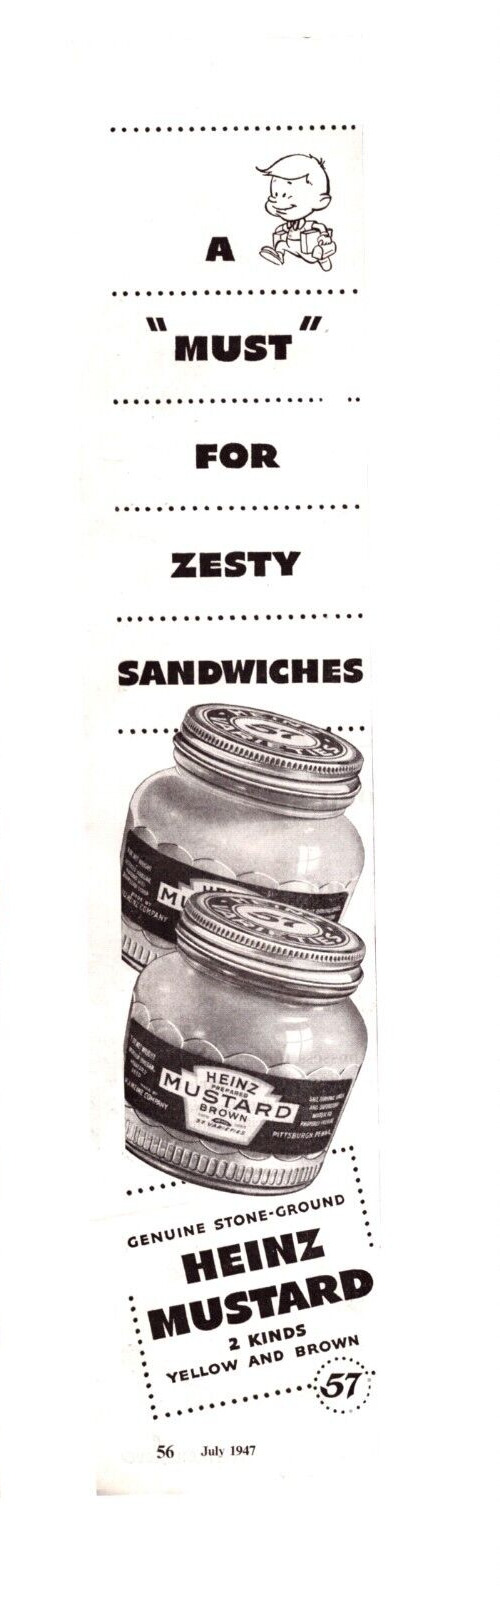 Vintage Print Ad 1947 Heinz Mustard A Must for Zesty Sandwiches Yellow Brown